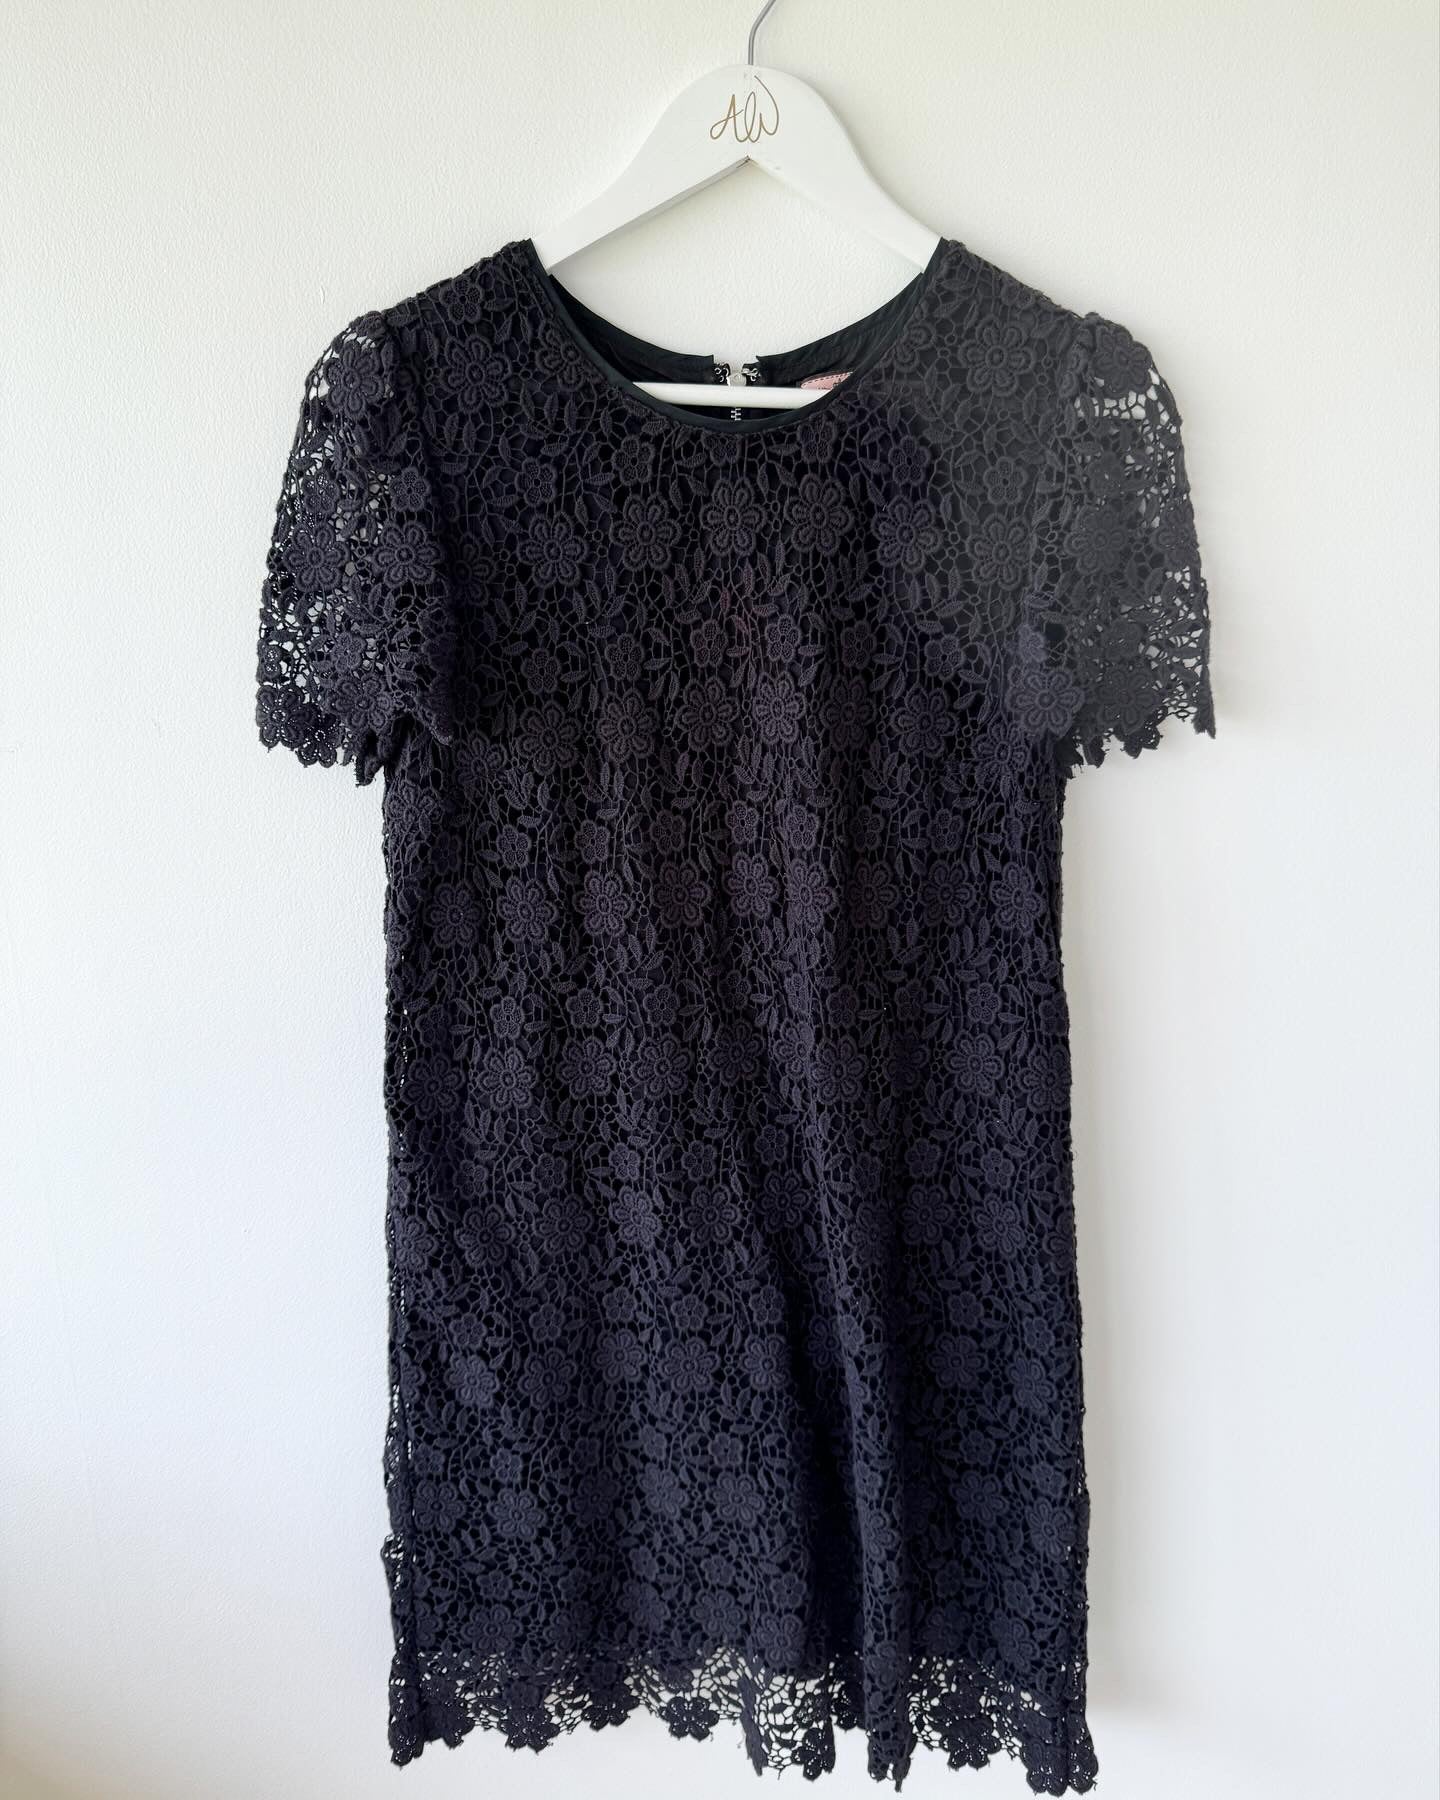 Lace Dress (Second hand)